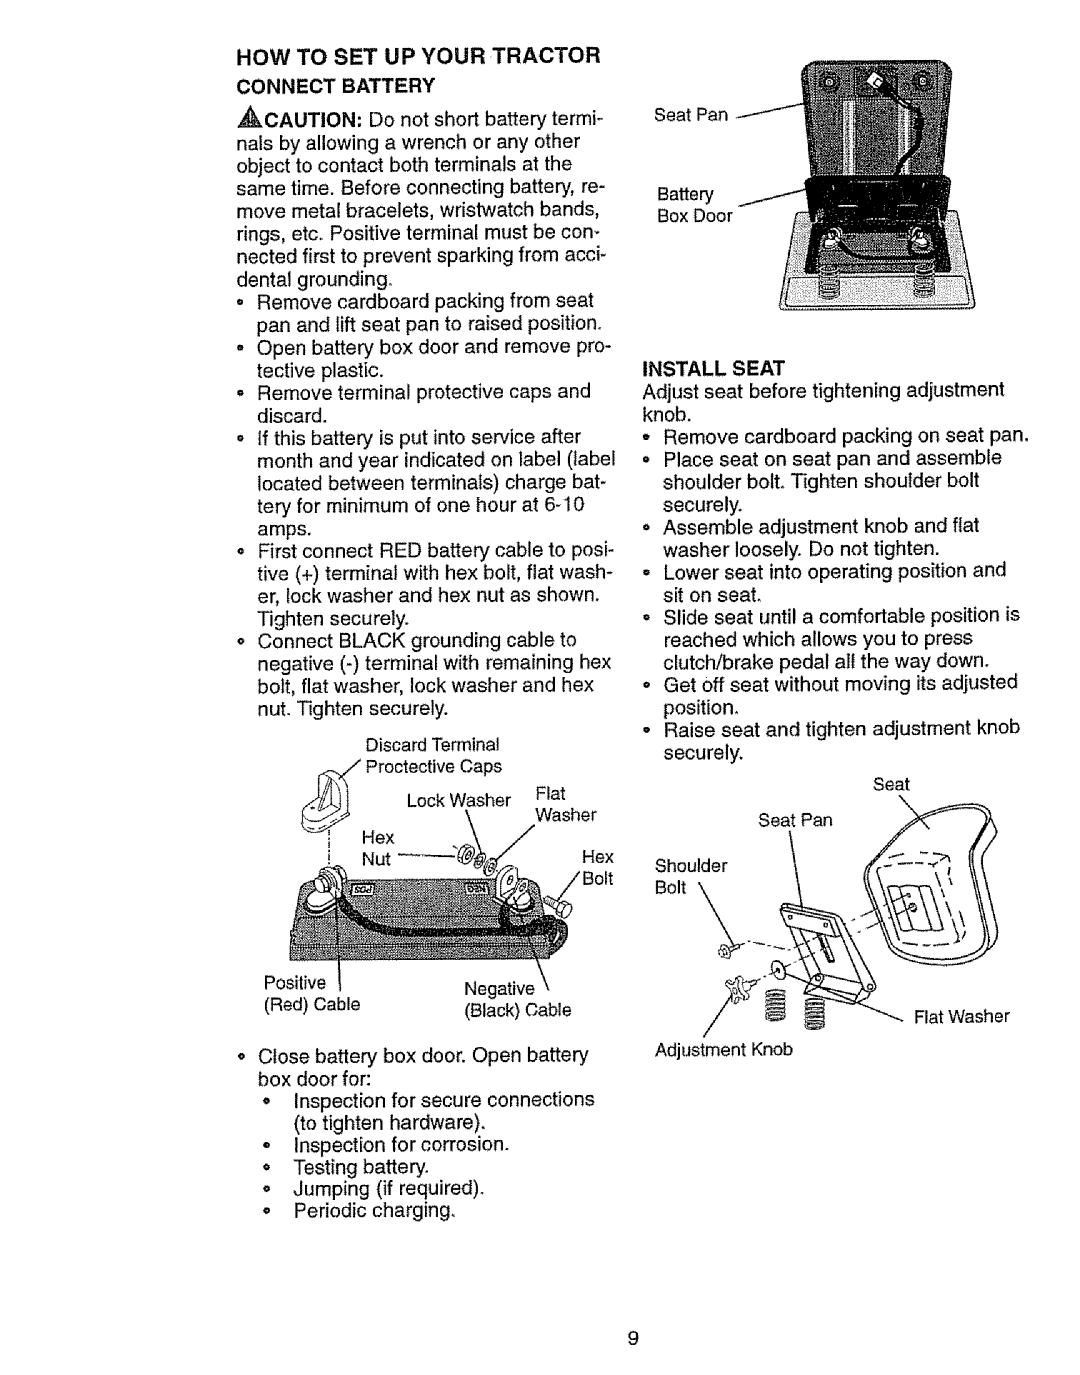 Craftsman 917.27103 owner manual How To Set Up Your Tractor, Install Seat, Adjust seat before tightening adjustment knob 